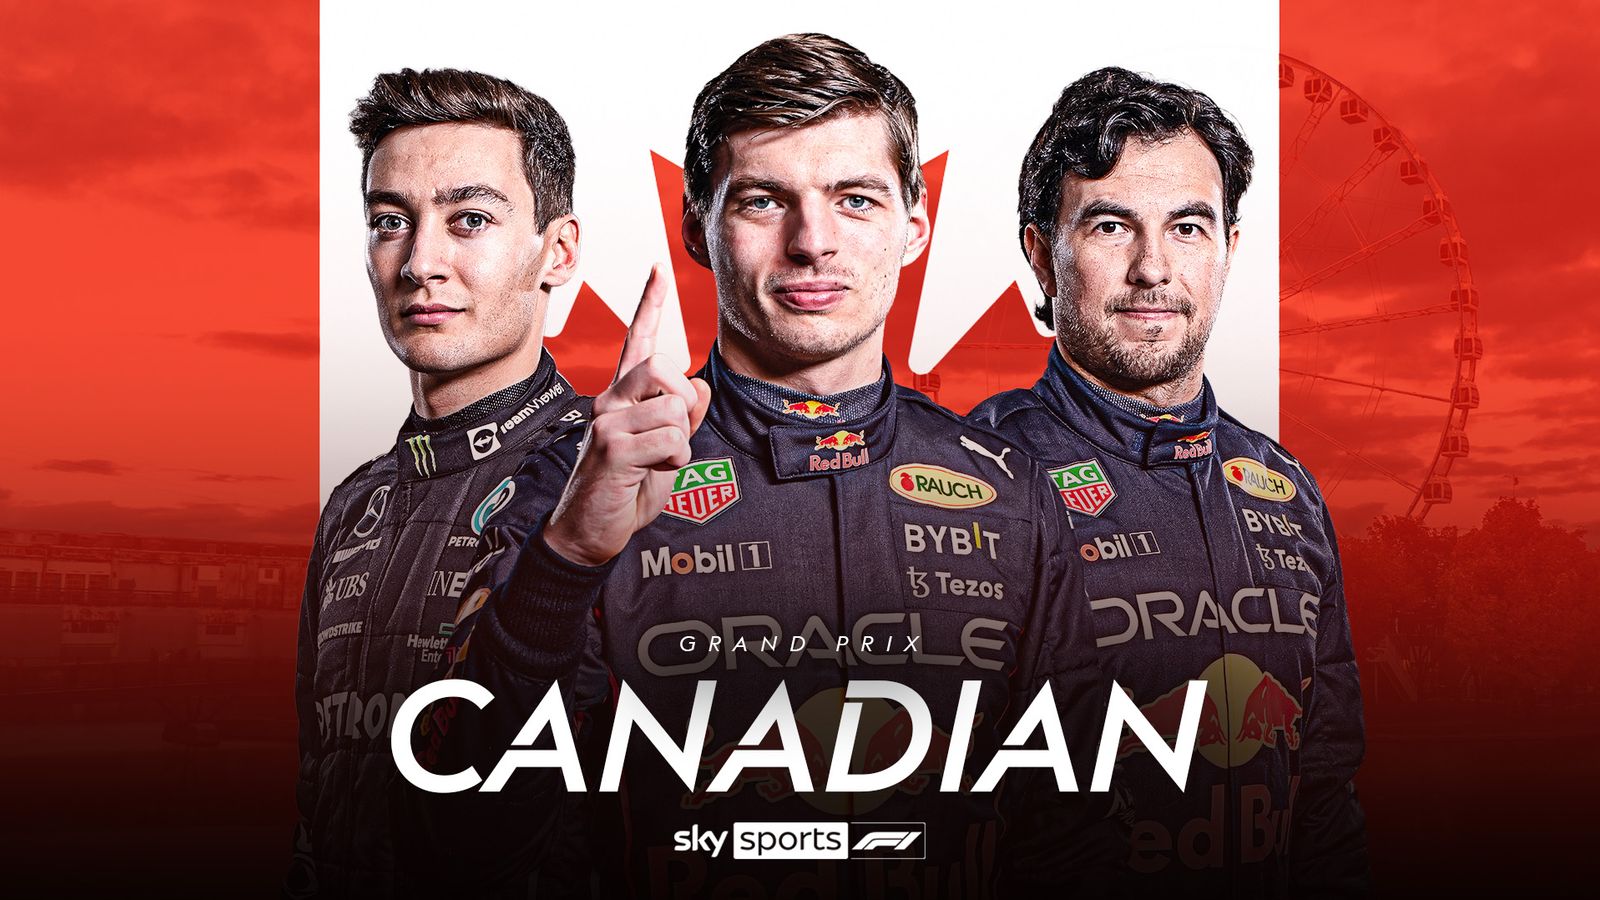 Canadian Grand Prix: When is the race in Montreal, live on Sky Sports?